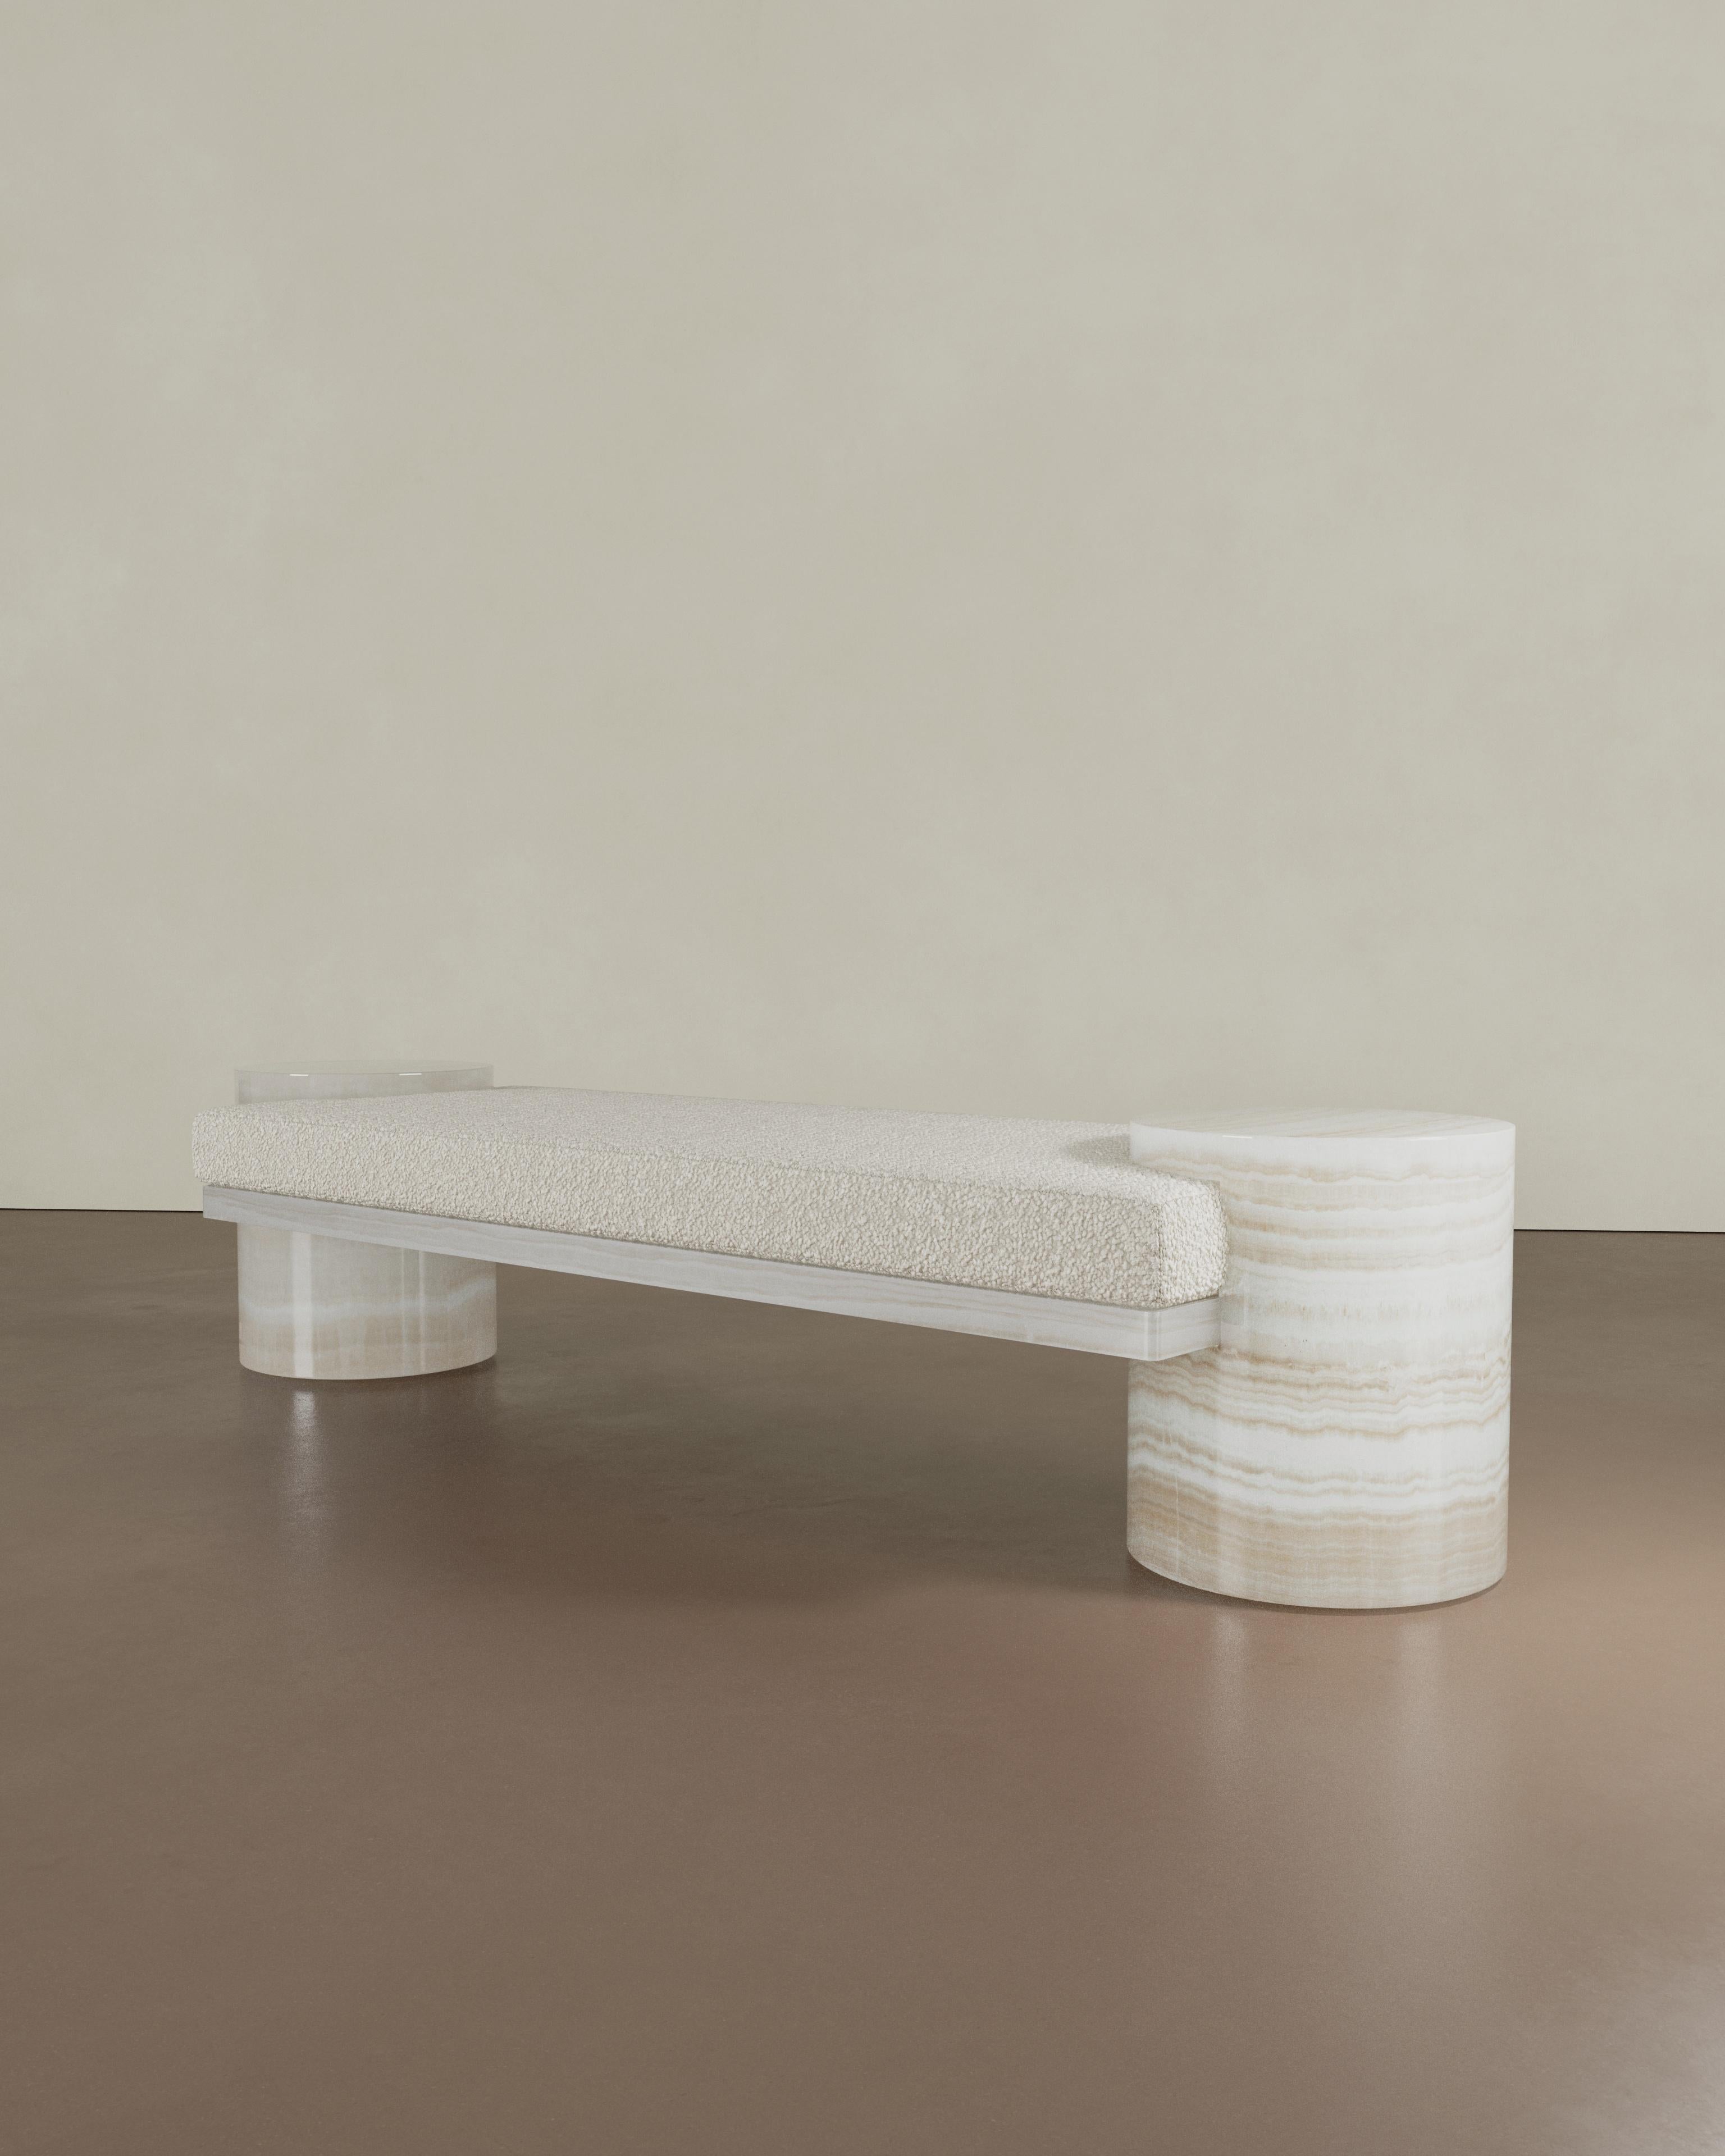 Introducing the Atlas Bench by The Essentialist. The Atlas Bench is a testament to simplicity and innovative design. Drawing from purity of form, it harmoniously merges the solidity of stone with the comfort of upholstery. These distinct materials